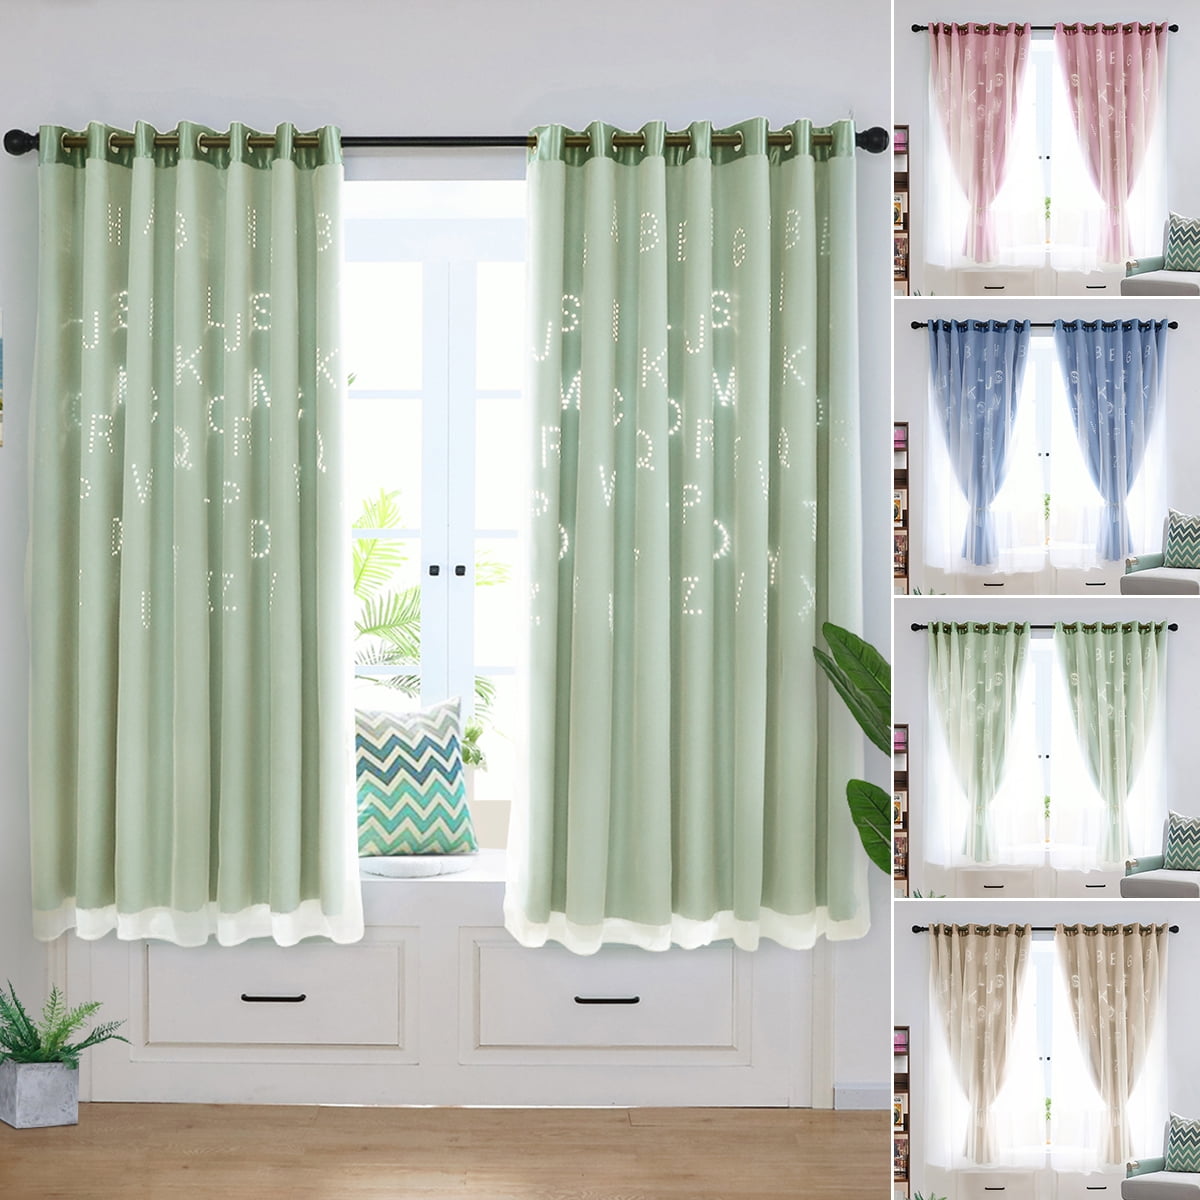 Heavy Thermal Blackout Door Curtains Eyelet Ring Top Ready Made Single Panel 